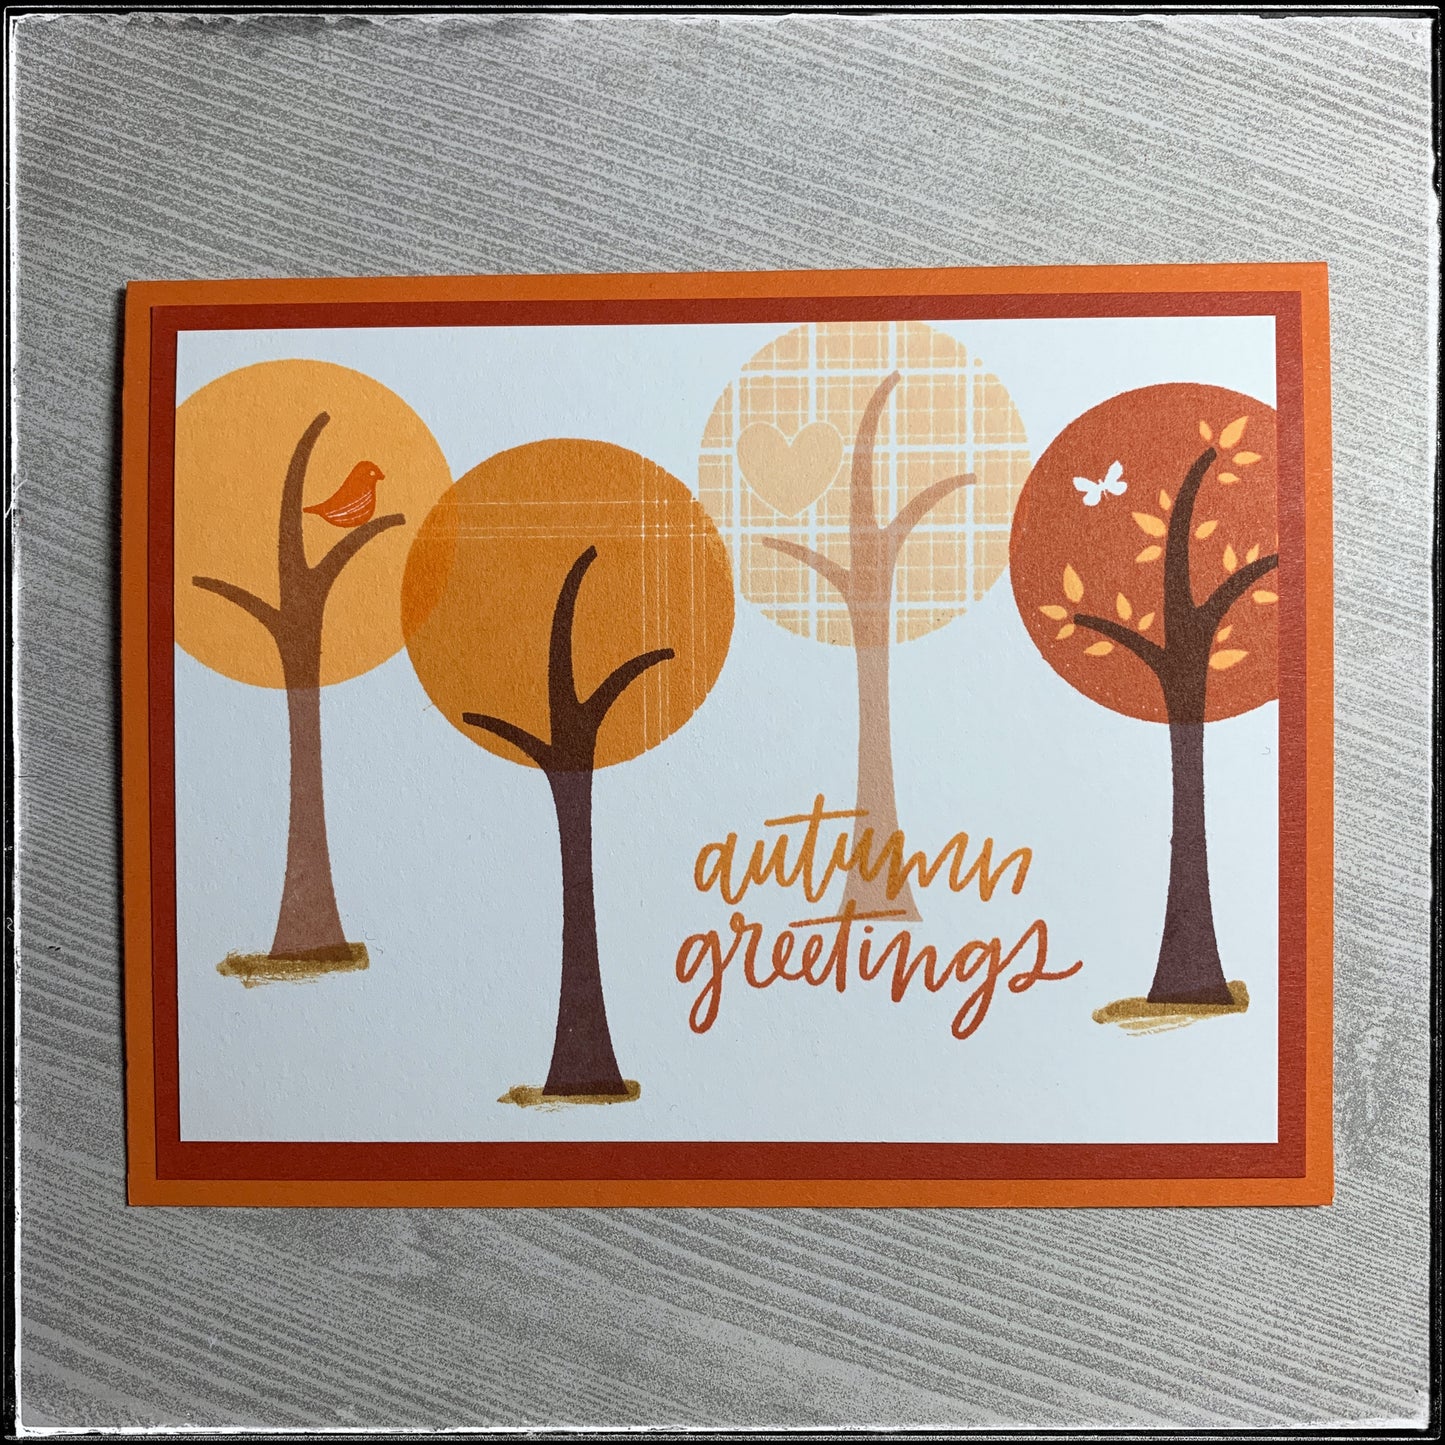 The flat-lay view of this seasonal handmade card. "Autumn greetings" is stamped in shades of orange and overlaps the trunk of one of the four trees that are stamped across the front panel. Each tree top is a slightly different shade of orange, creating a mostly monochromatic look on this handmade card. 